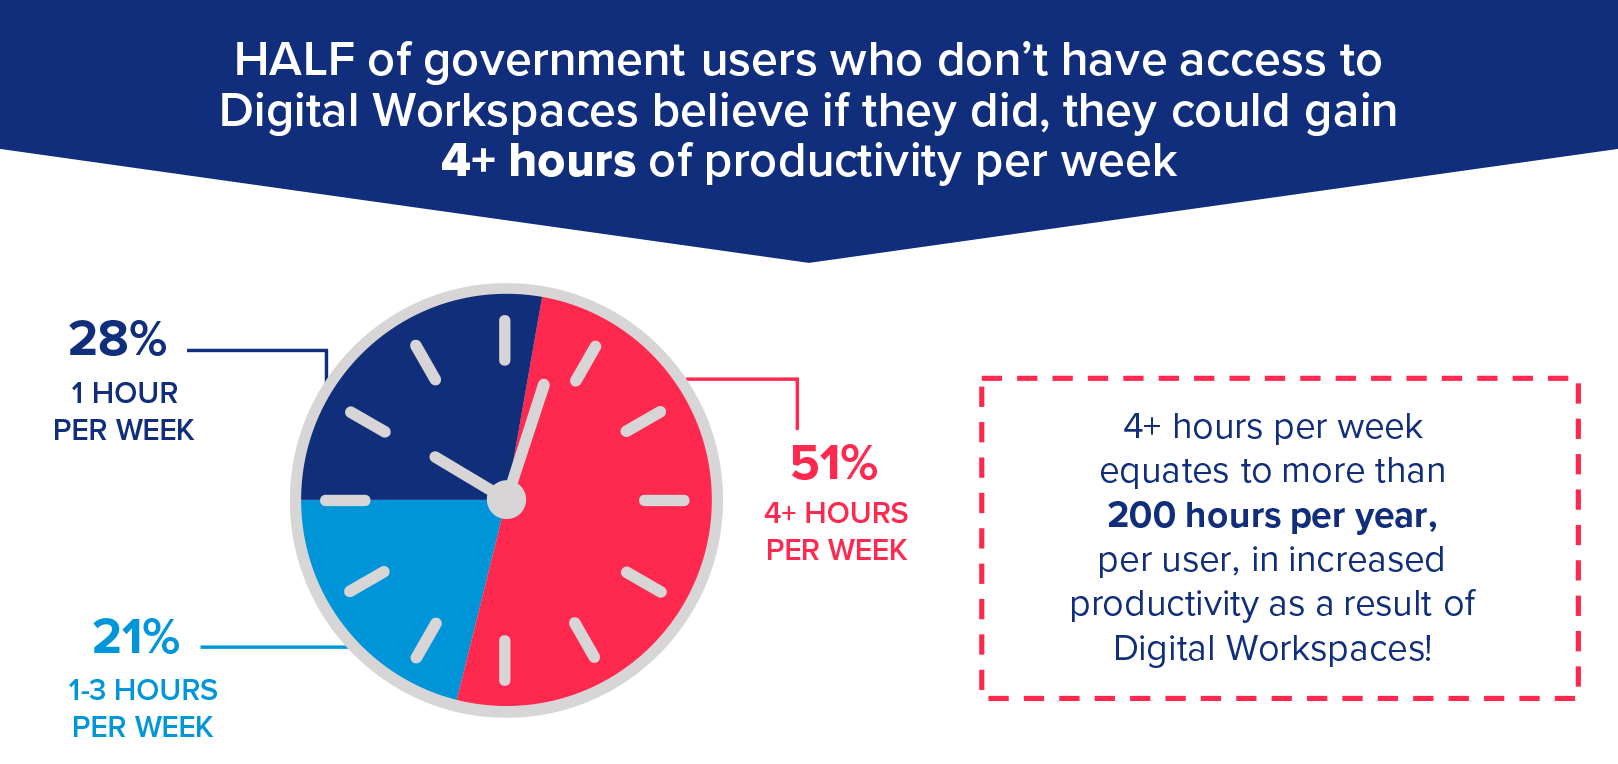 HALF of government users who don't have access to Digital Workspaces believe if they did, they could gain 4+ hours of productivity per week